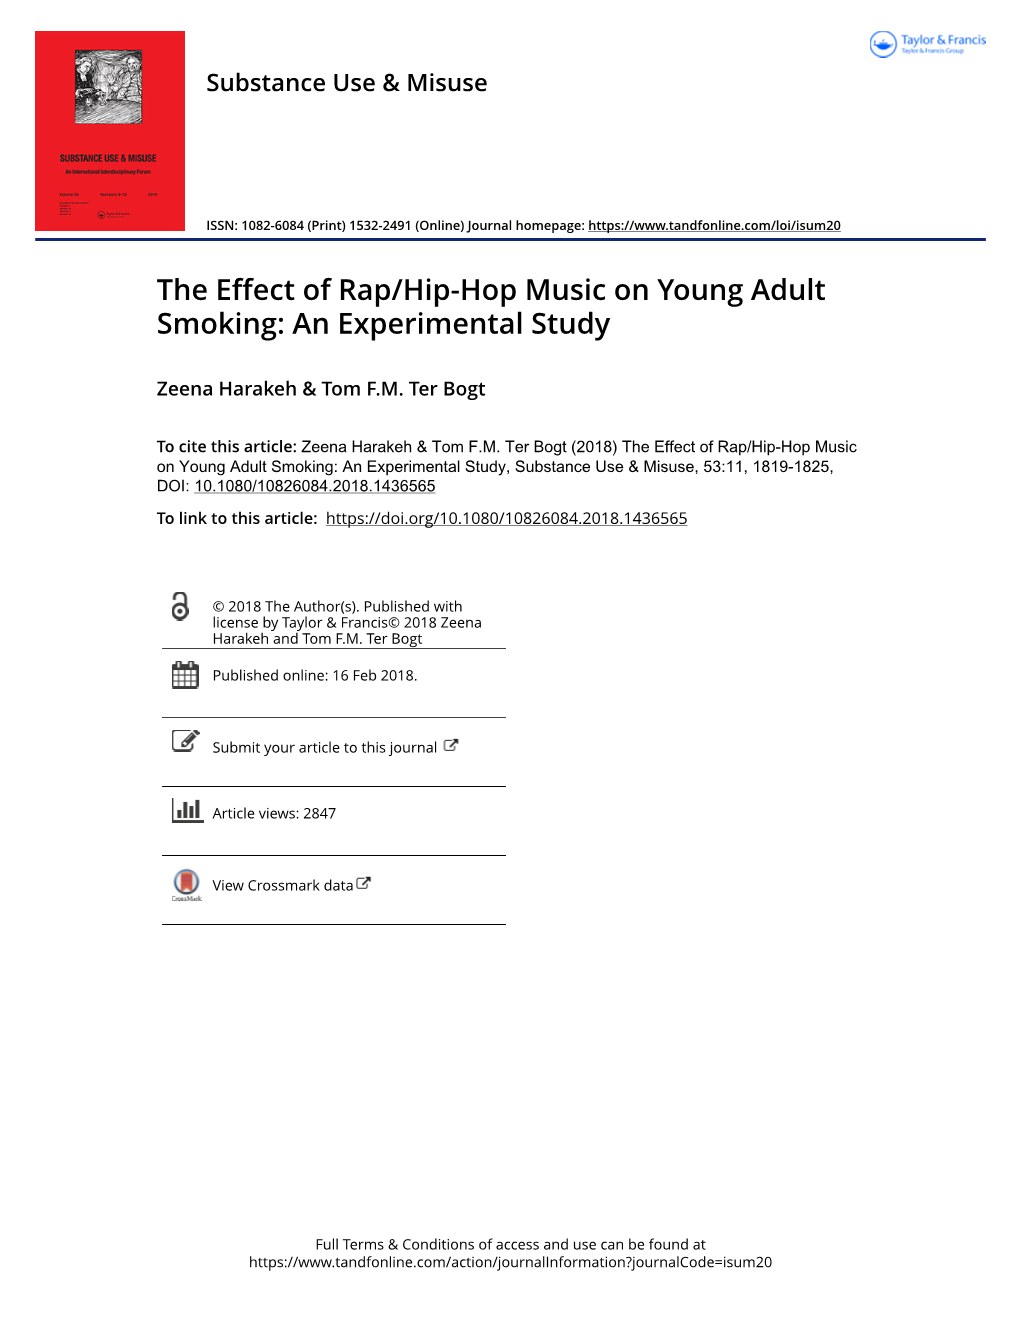 The Effect of Rap/Hip-Hop Music on Young Adult Smoking: an Experimental Study